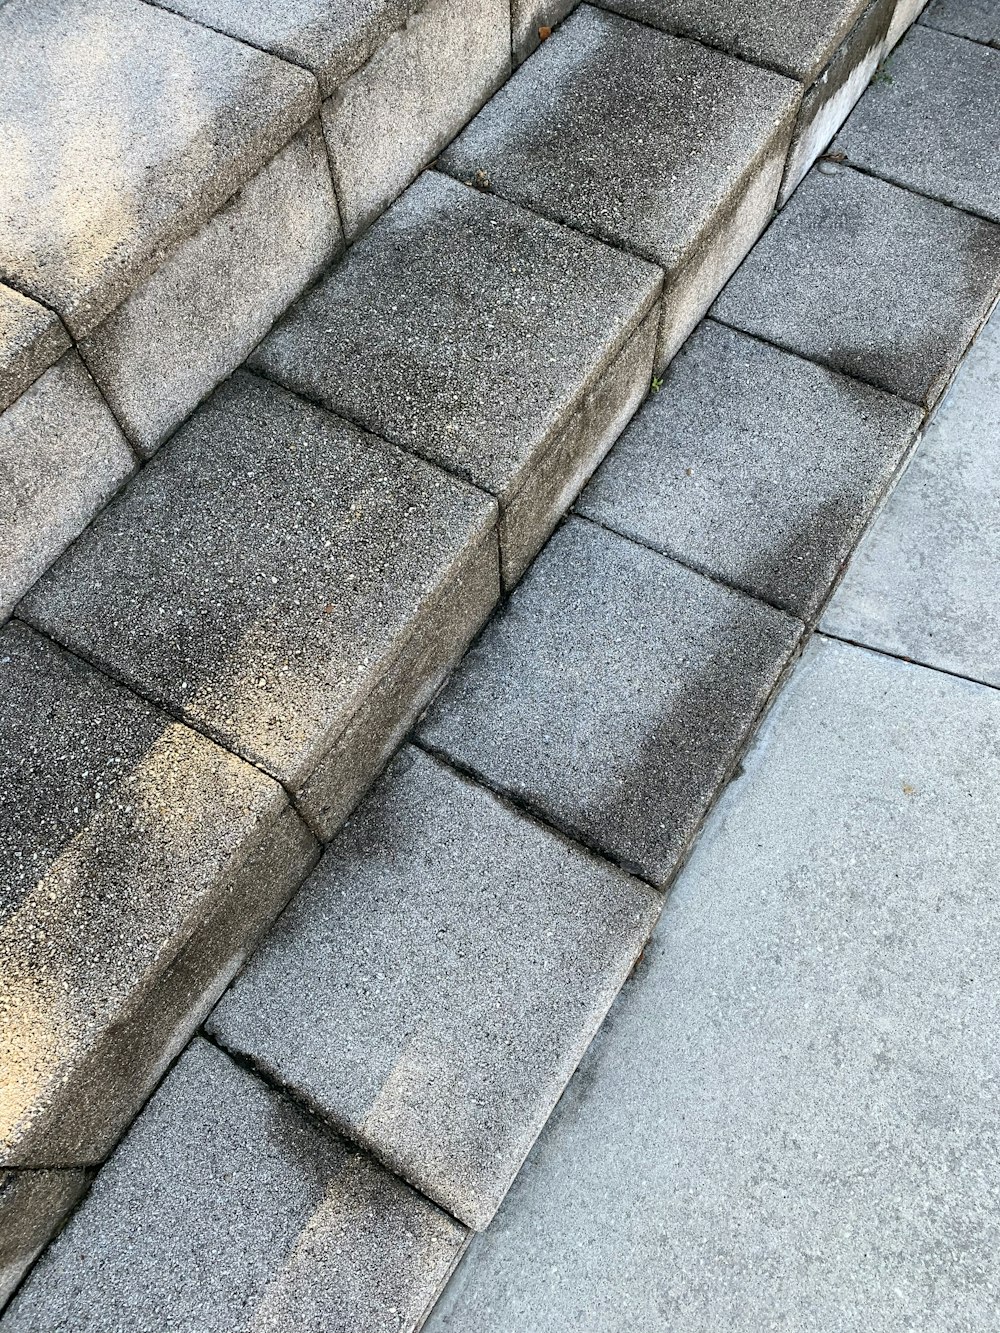 a close up of some steps made of cement